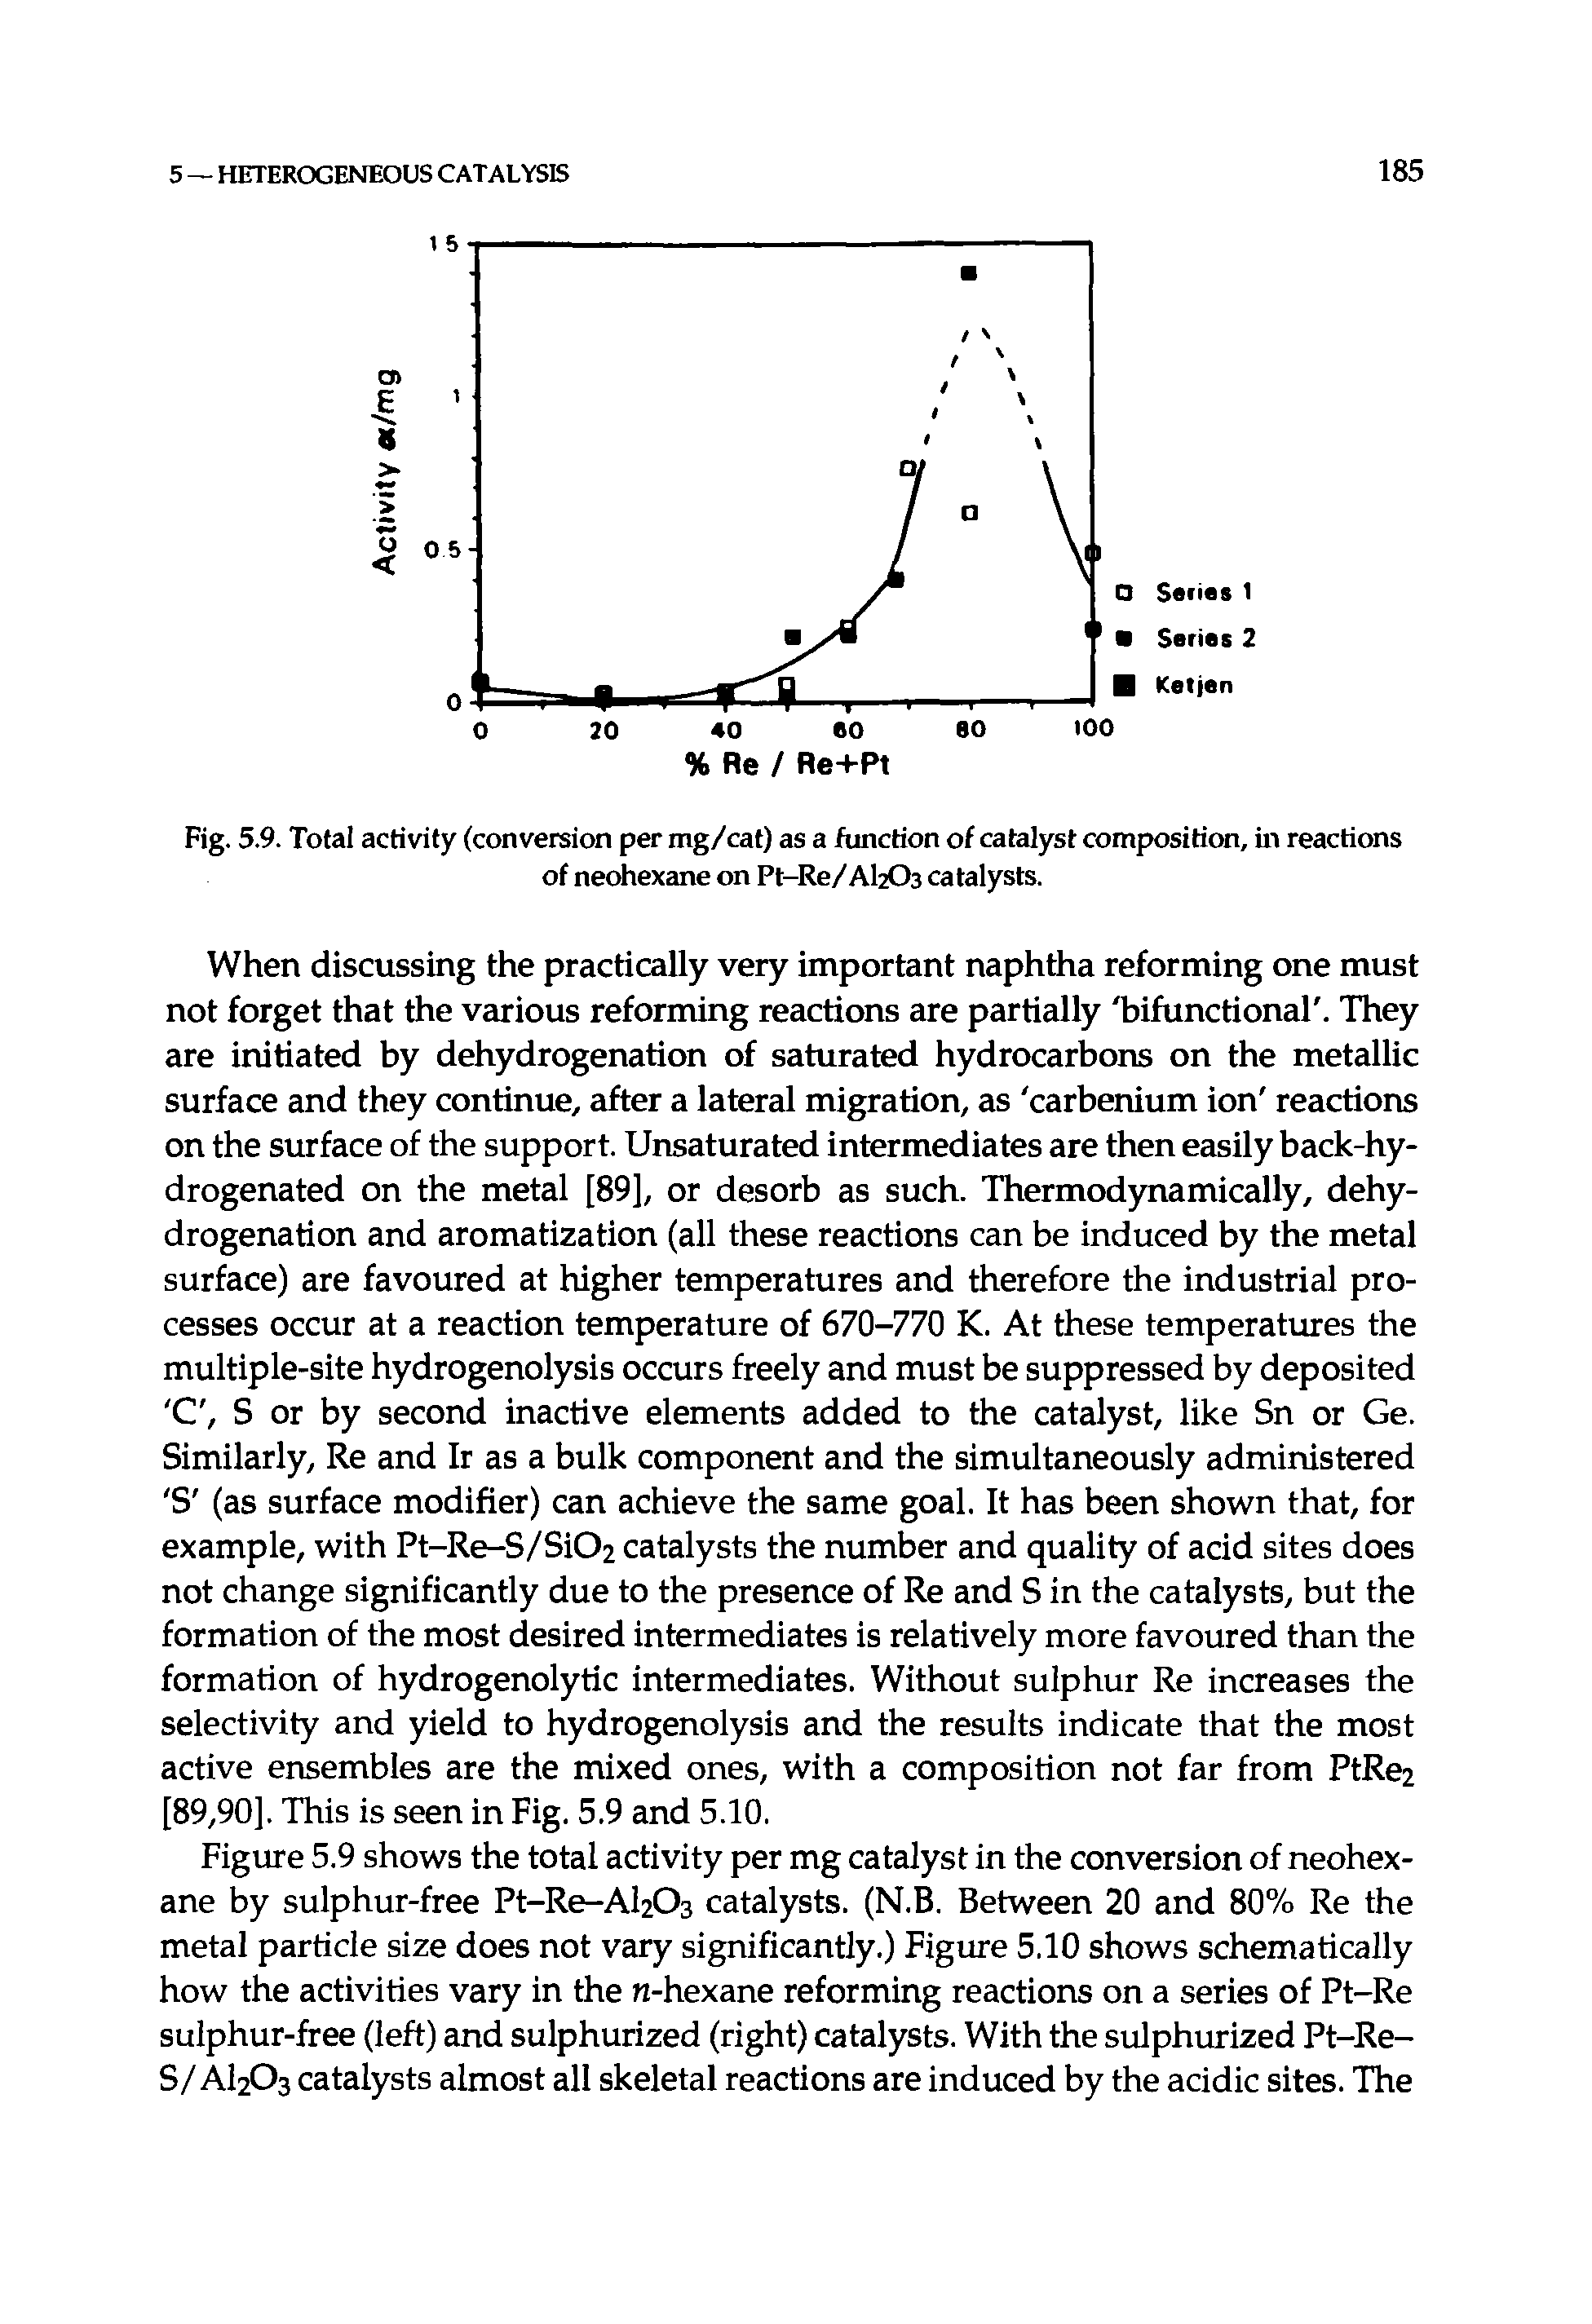 Fig. 5.9. Total activity (conversion per mg/cat) as a function of catalyst composition, in reactions of neohexane on Pt-Re/ AI2O3 catalysts.